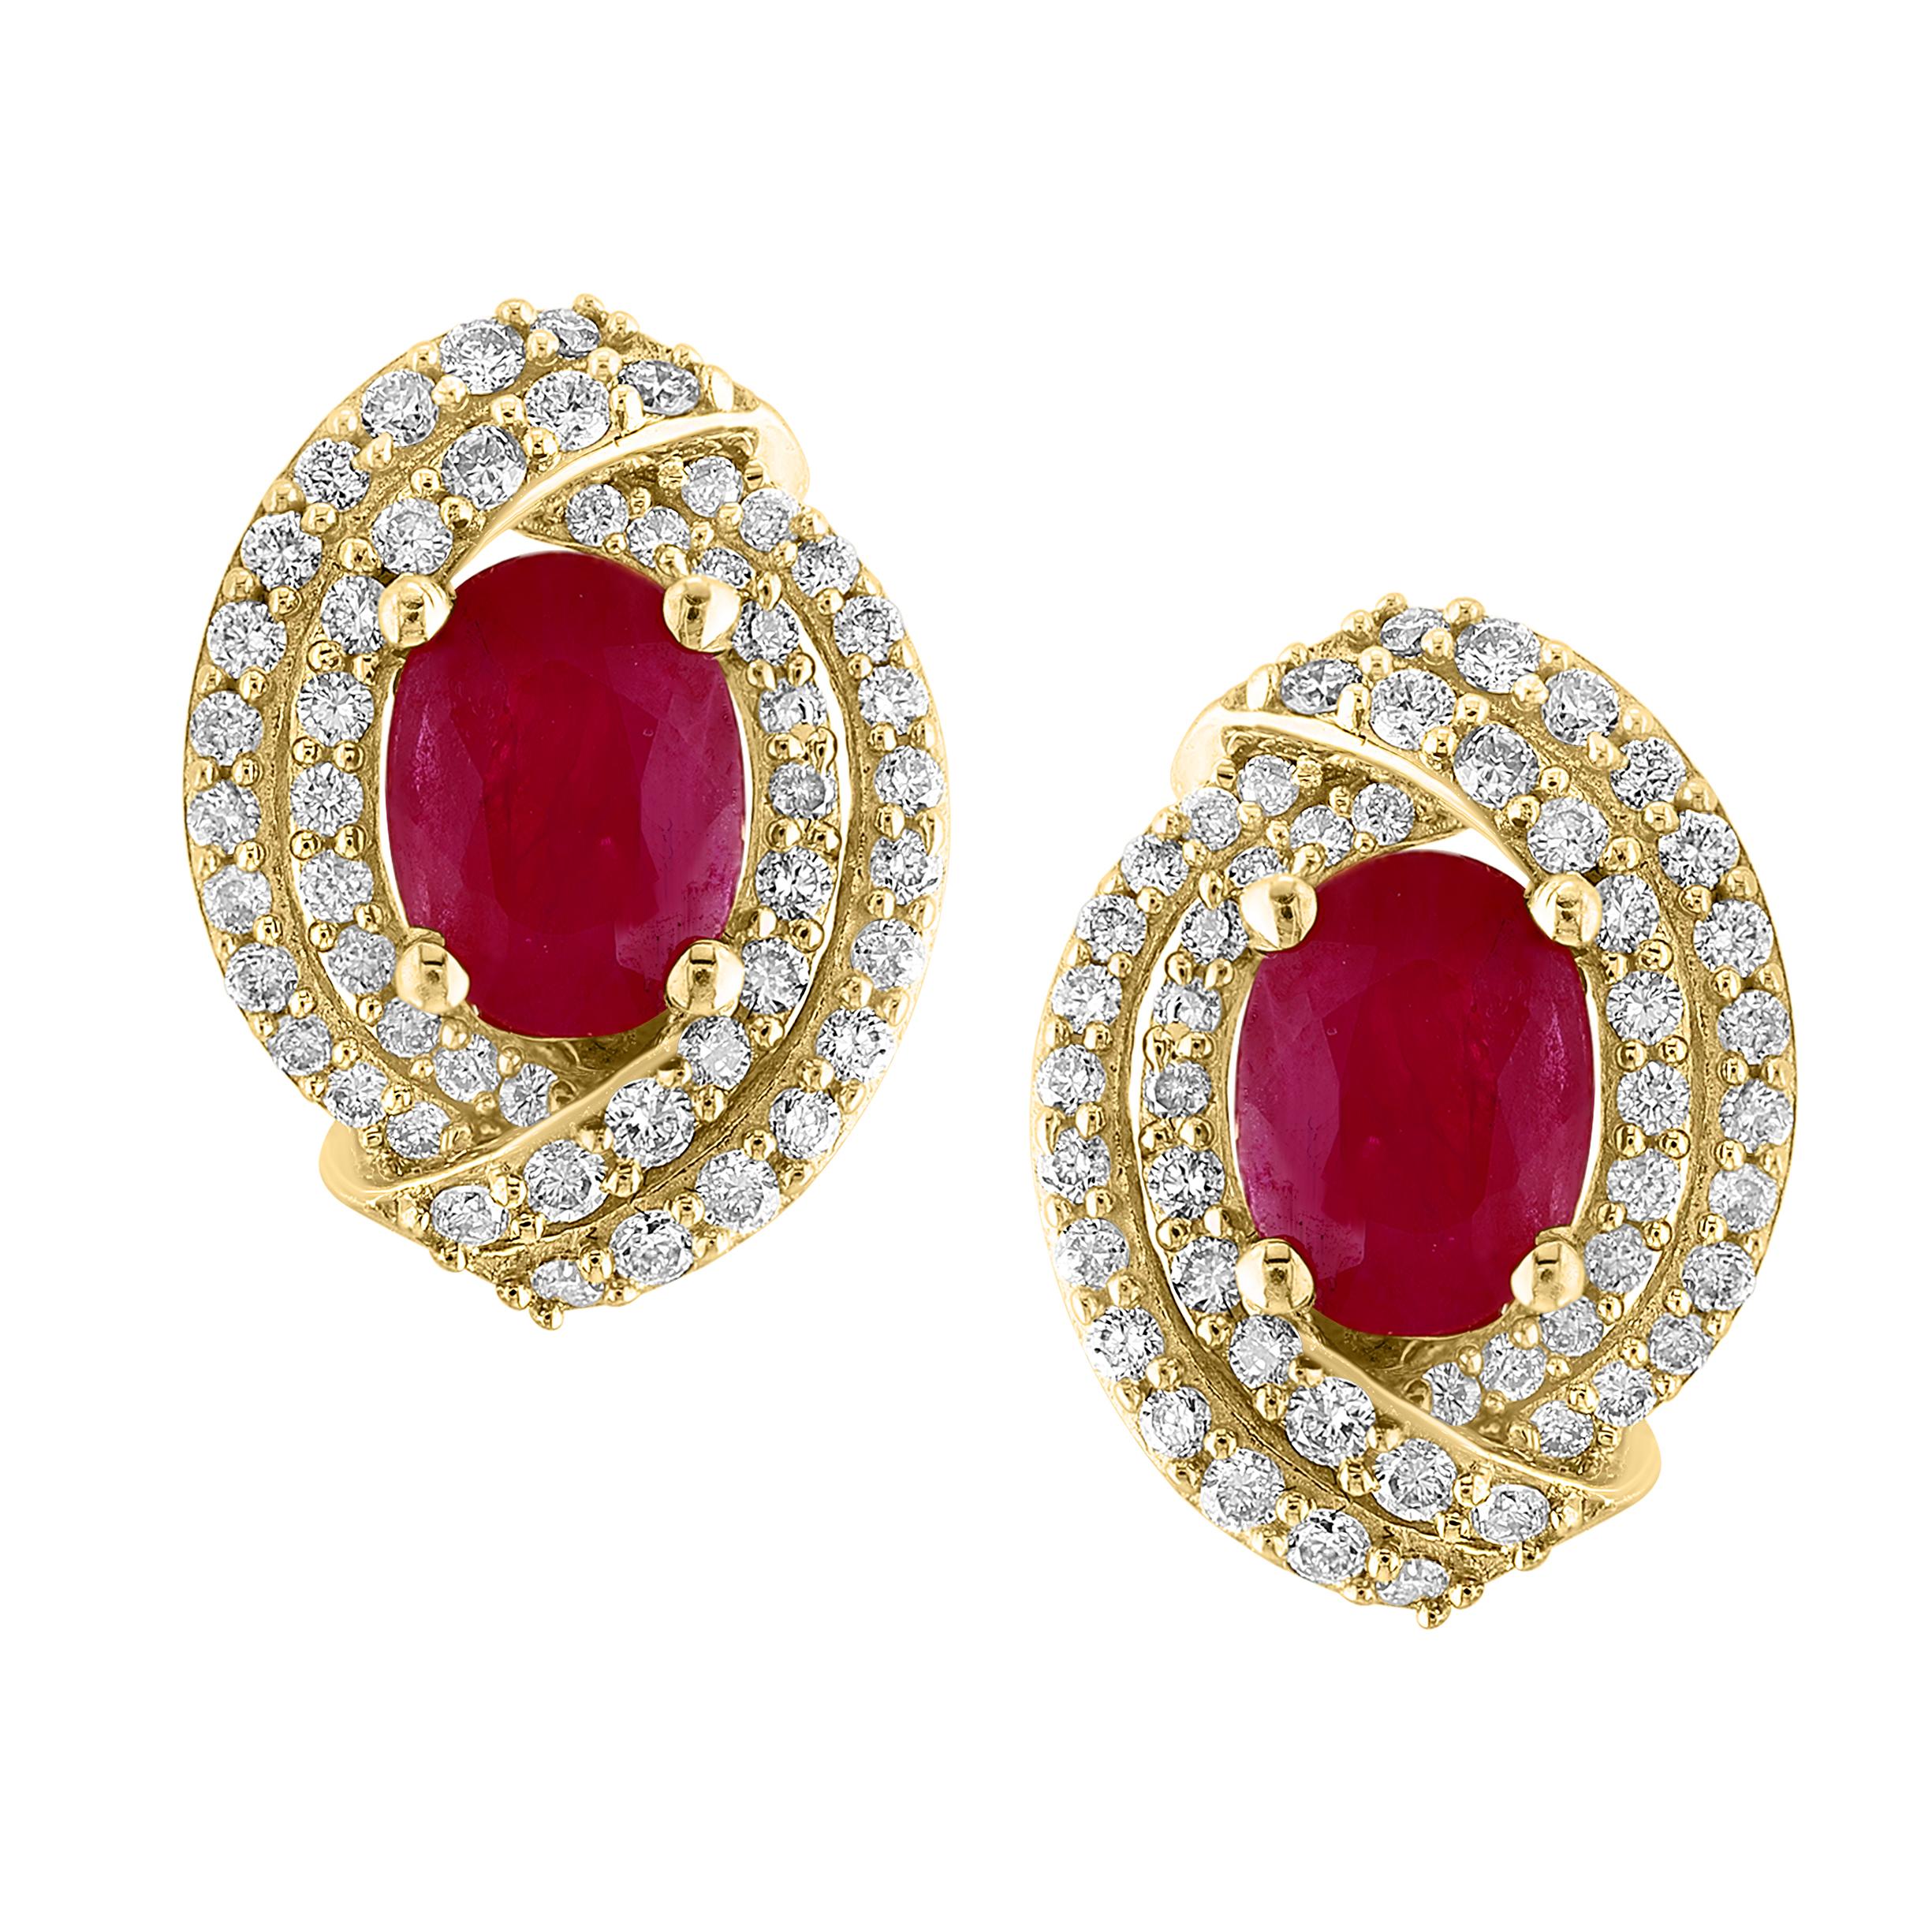 Oval Cut 3.5 Carat Oval Natural  Ruby & 1.2 Ct Diamond Stud Earrings 14 Karat Yellow Gold For Sale